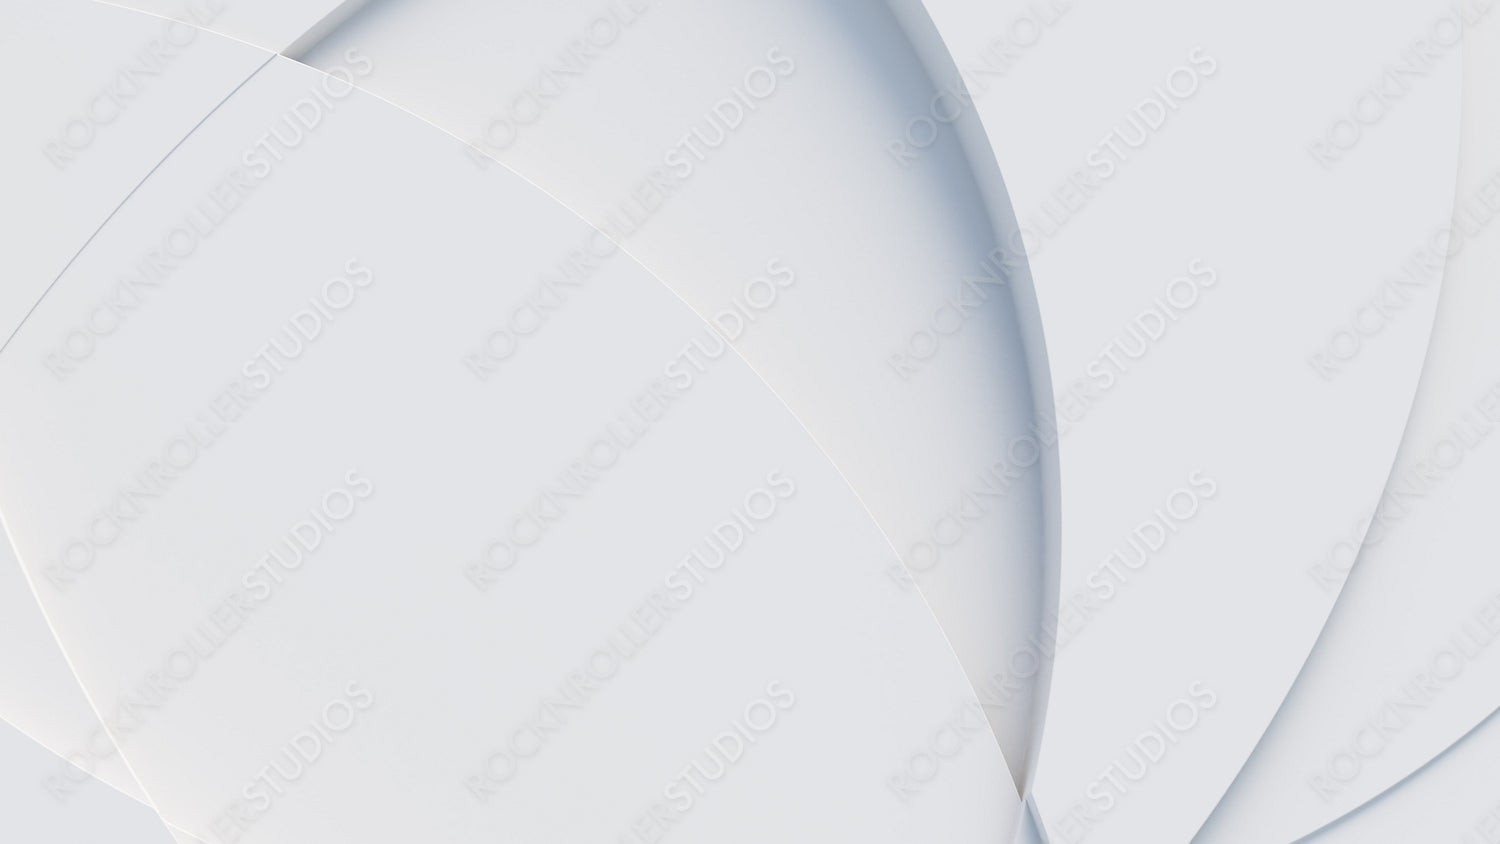 White, Tech Background with a Geometric 3D Structure. Clean, Minimal design with Simple Futuristic Forms. 3D Render.